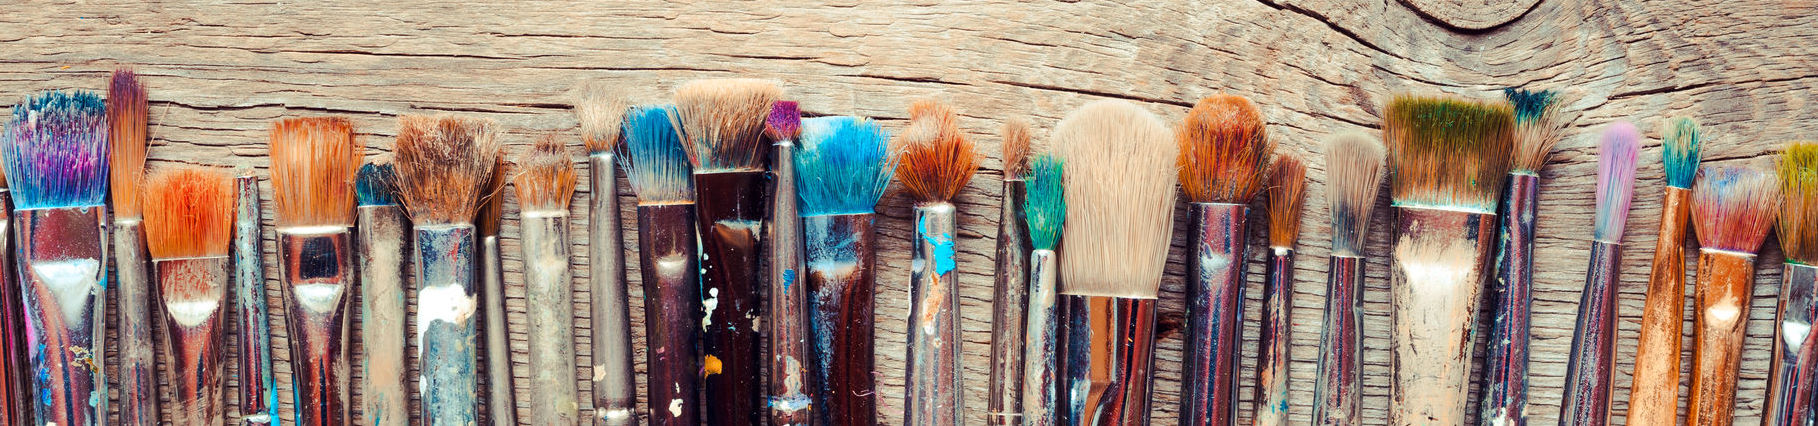 35515339 - row of artist paintbrushes closeup on old wooden rustic background